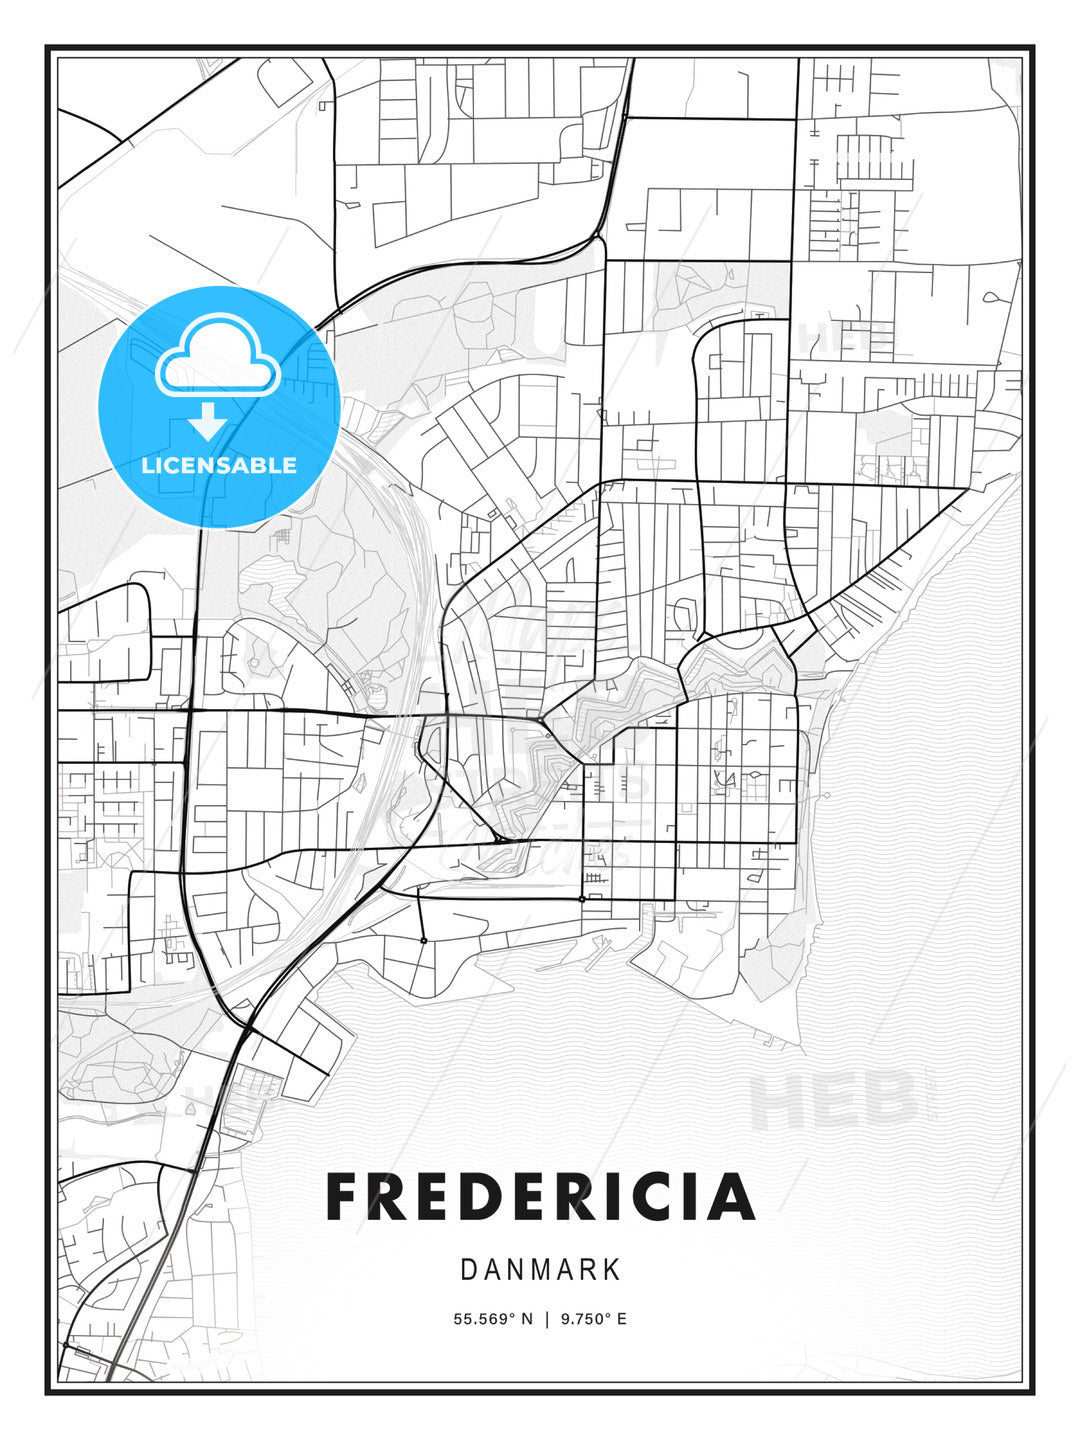 Fredericia, Denmark, Modern Print Template in Various Formats - HEBSTREITS Sketches